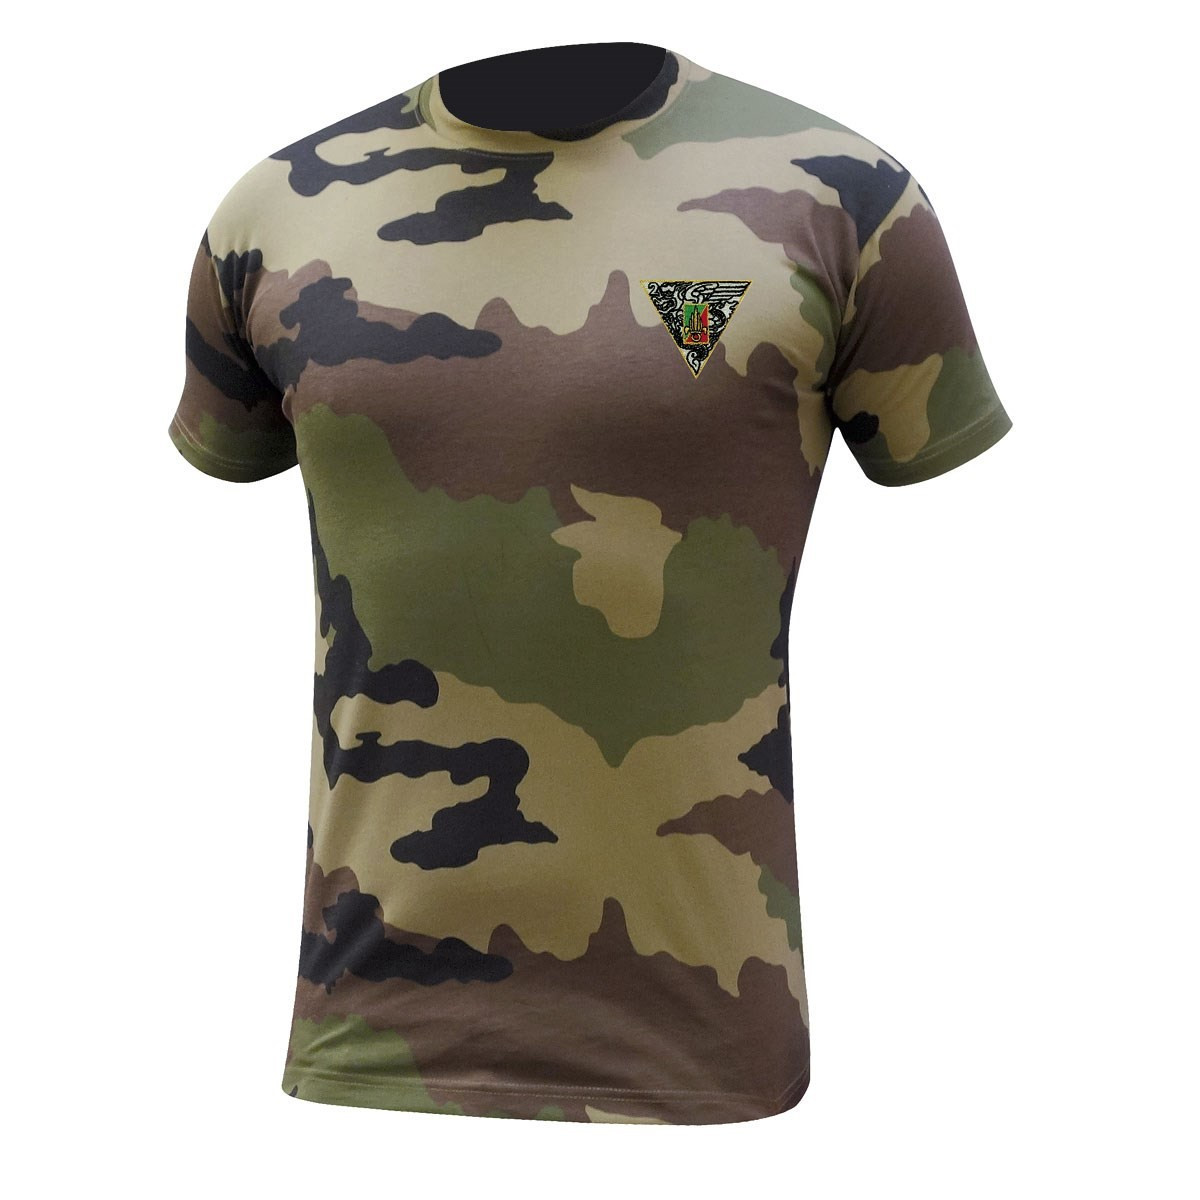 TEE SHIRT MANCHES COURTES CAMOUFLAGE BRODE 2 REP